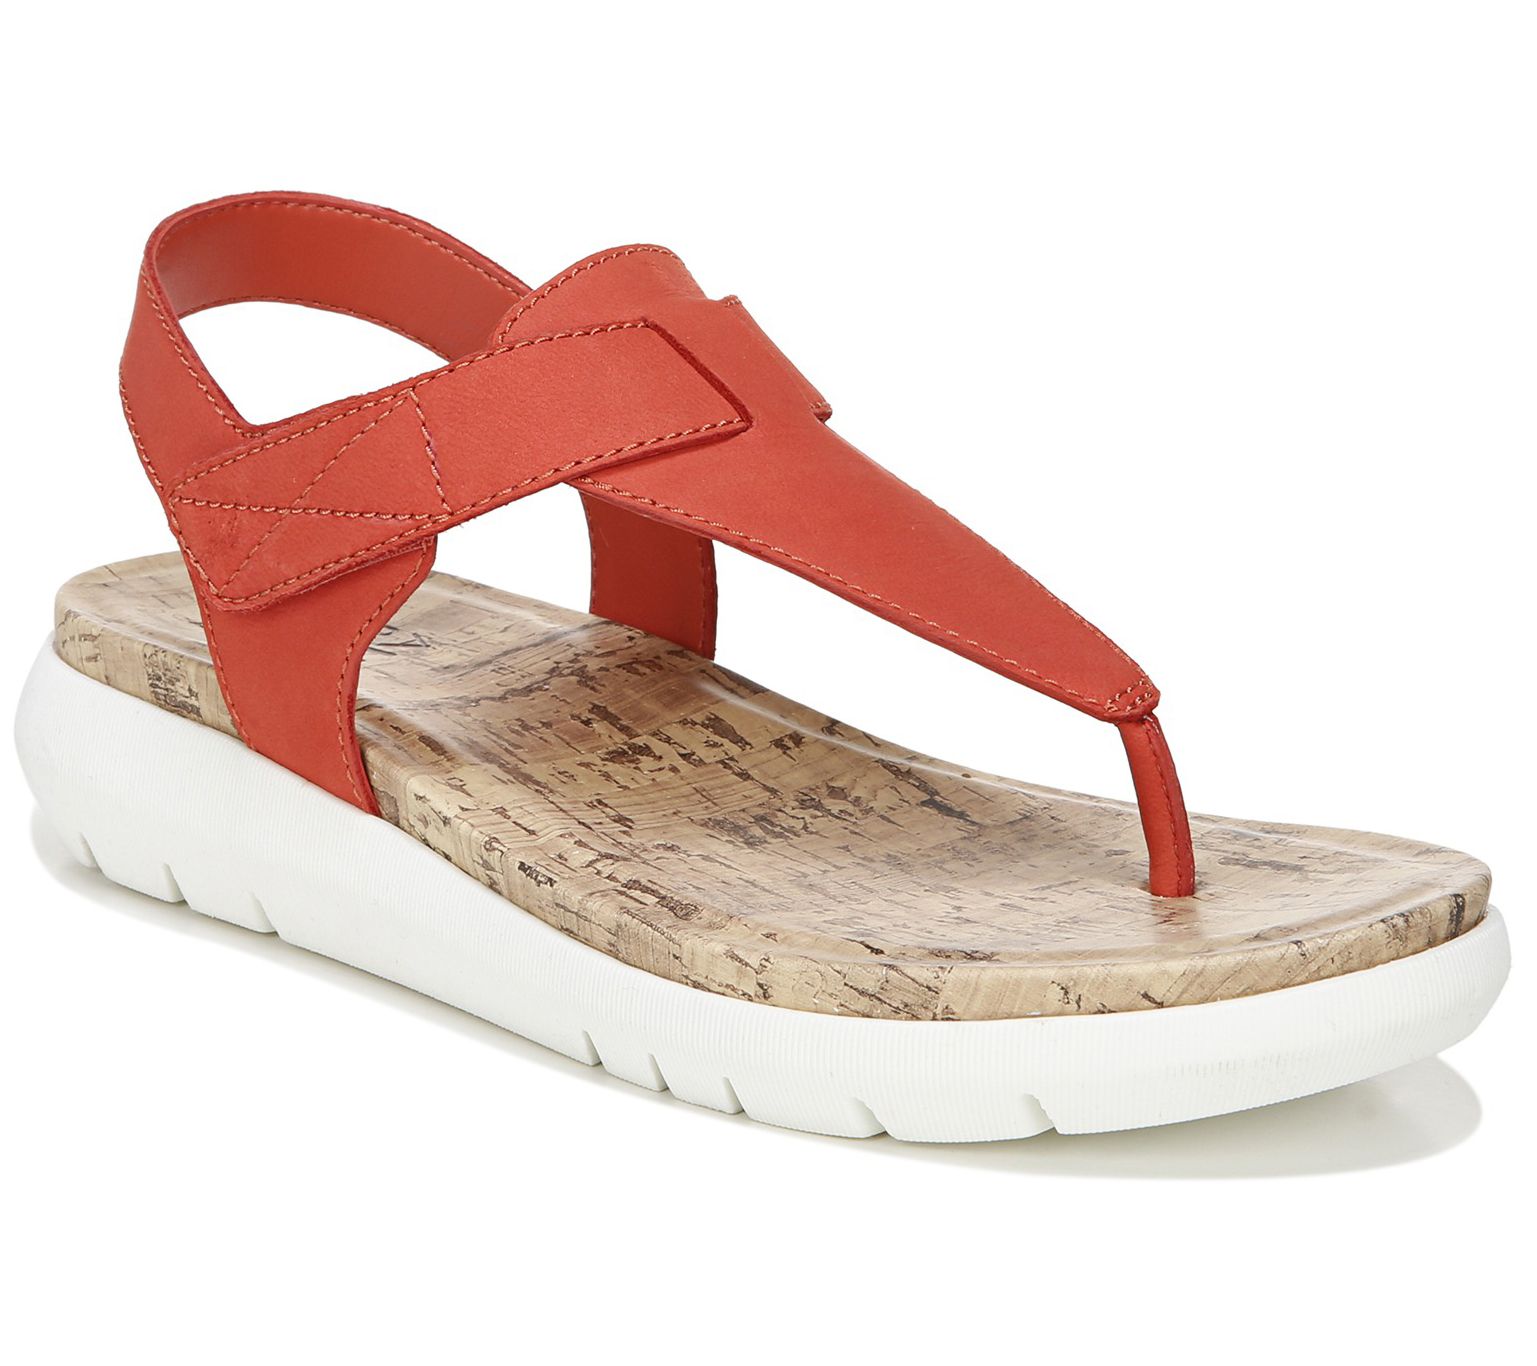 Naturalizer Leather Thong Sport Sandals - Lincoln - QVC.com